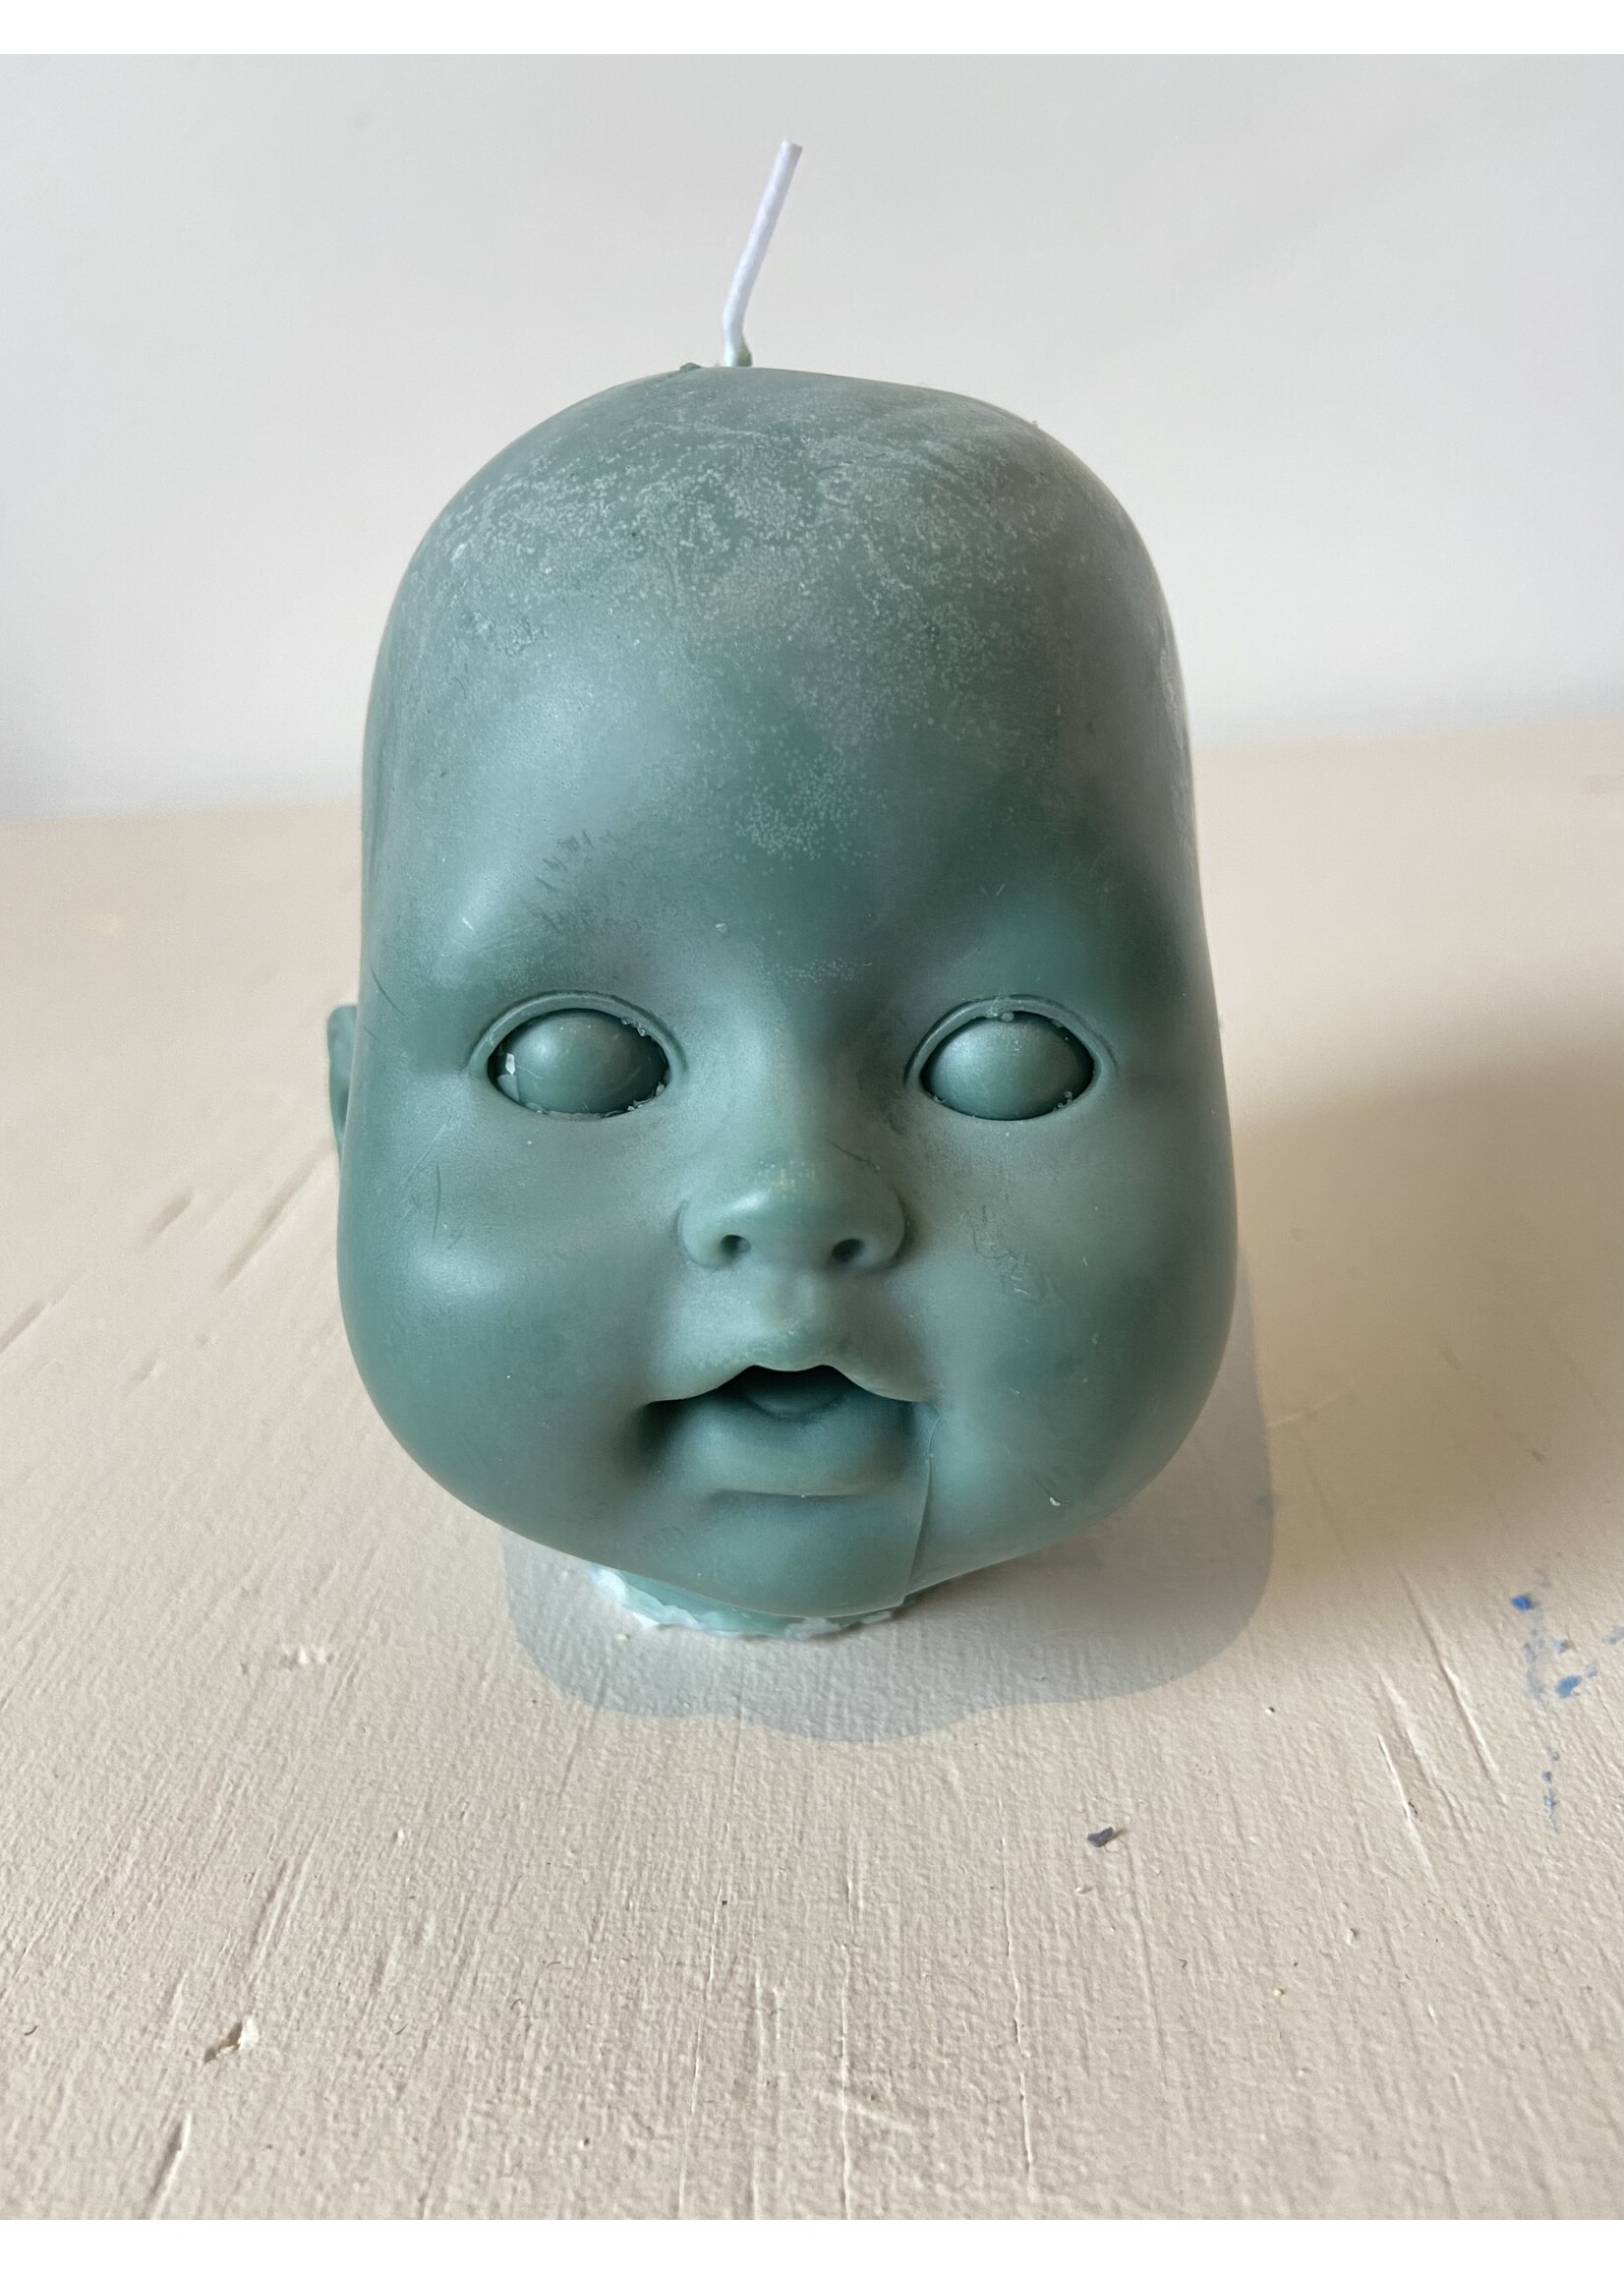 Candle Lume Candles "Creepy Baby Head" by LUME